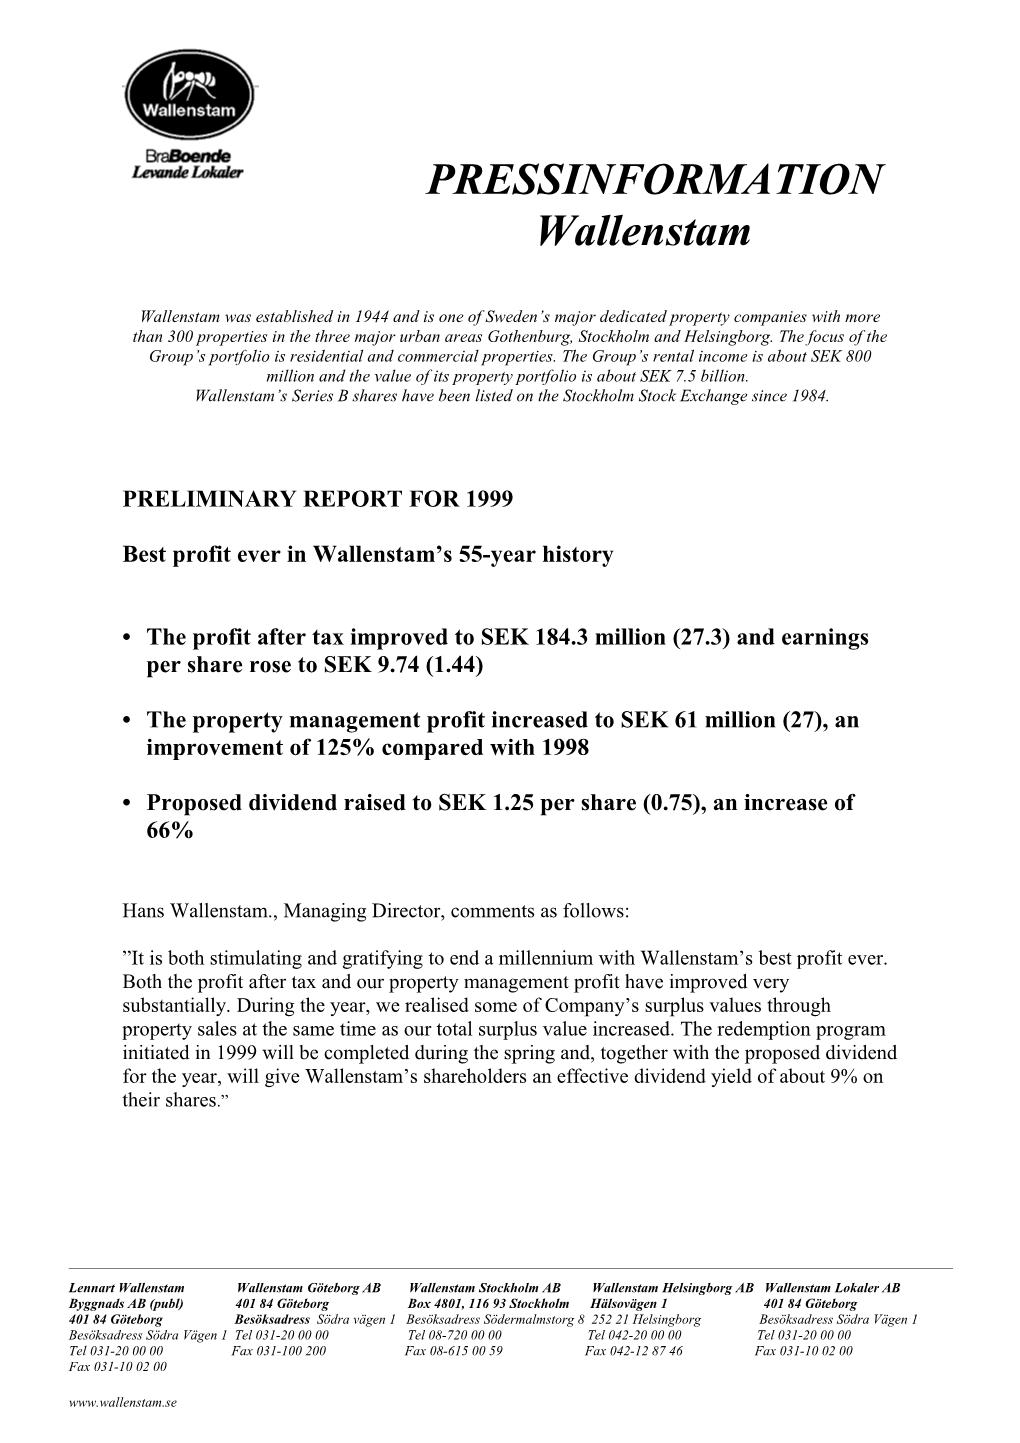 Wallenstam S Series B Shares Have Been Listed on the Stockholm Stock Exchange Since 1984